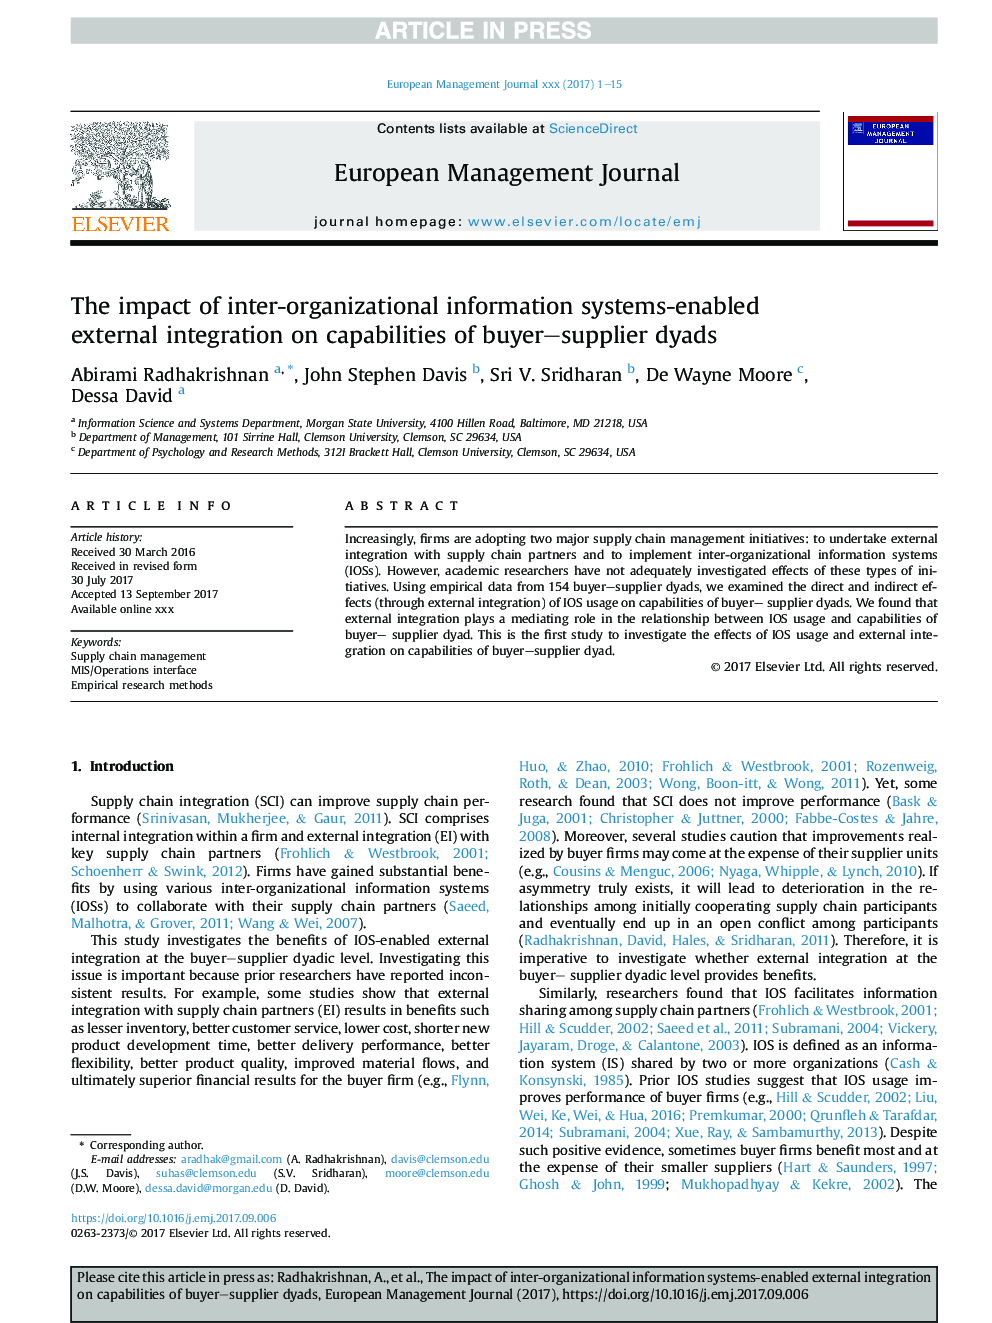 The impact of inter-organizational information systems-enabled external integration on capabilities of buyer-supplier dyads